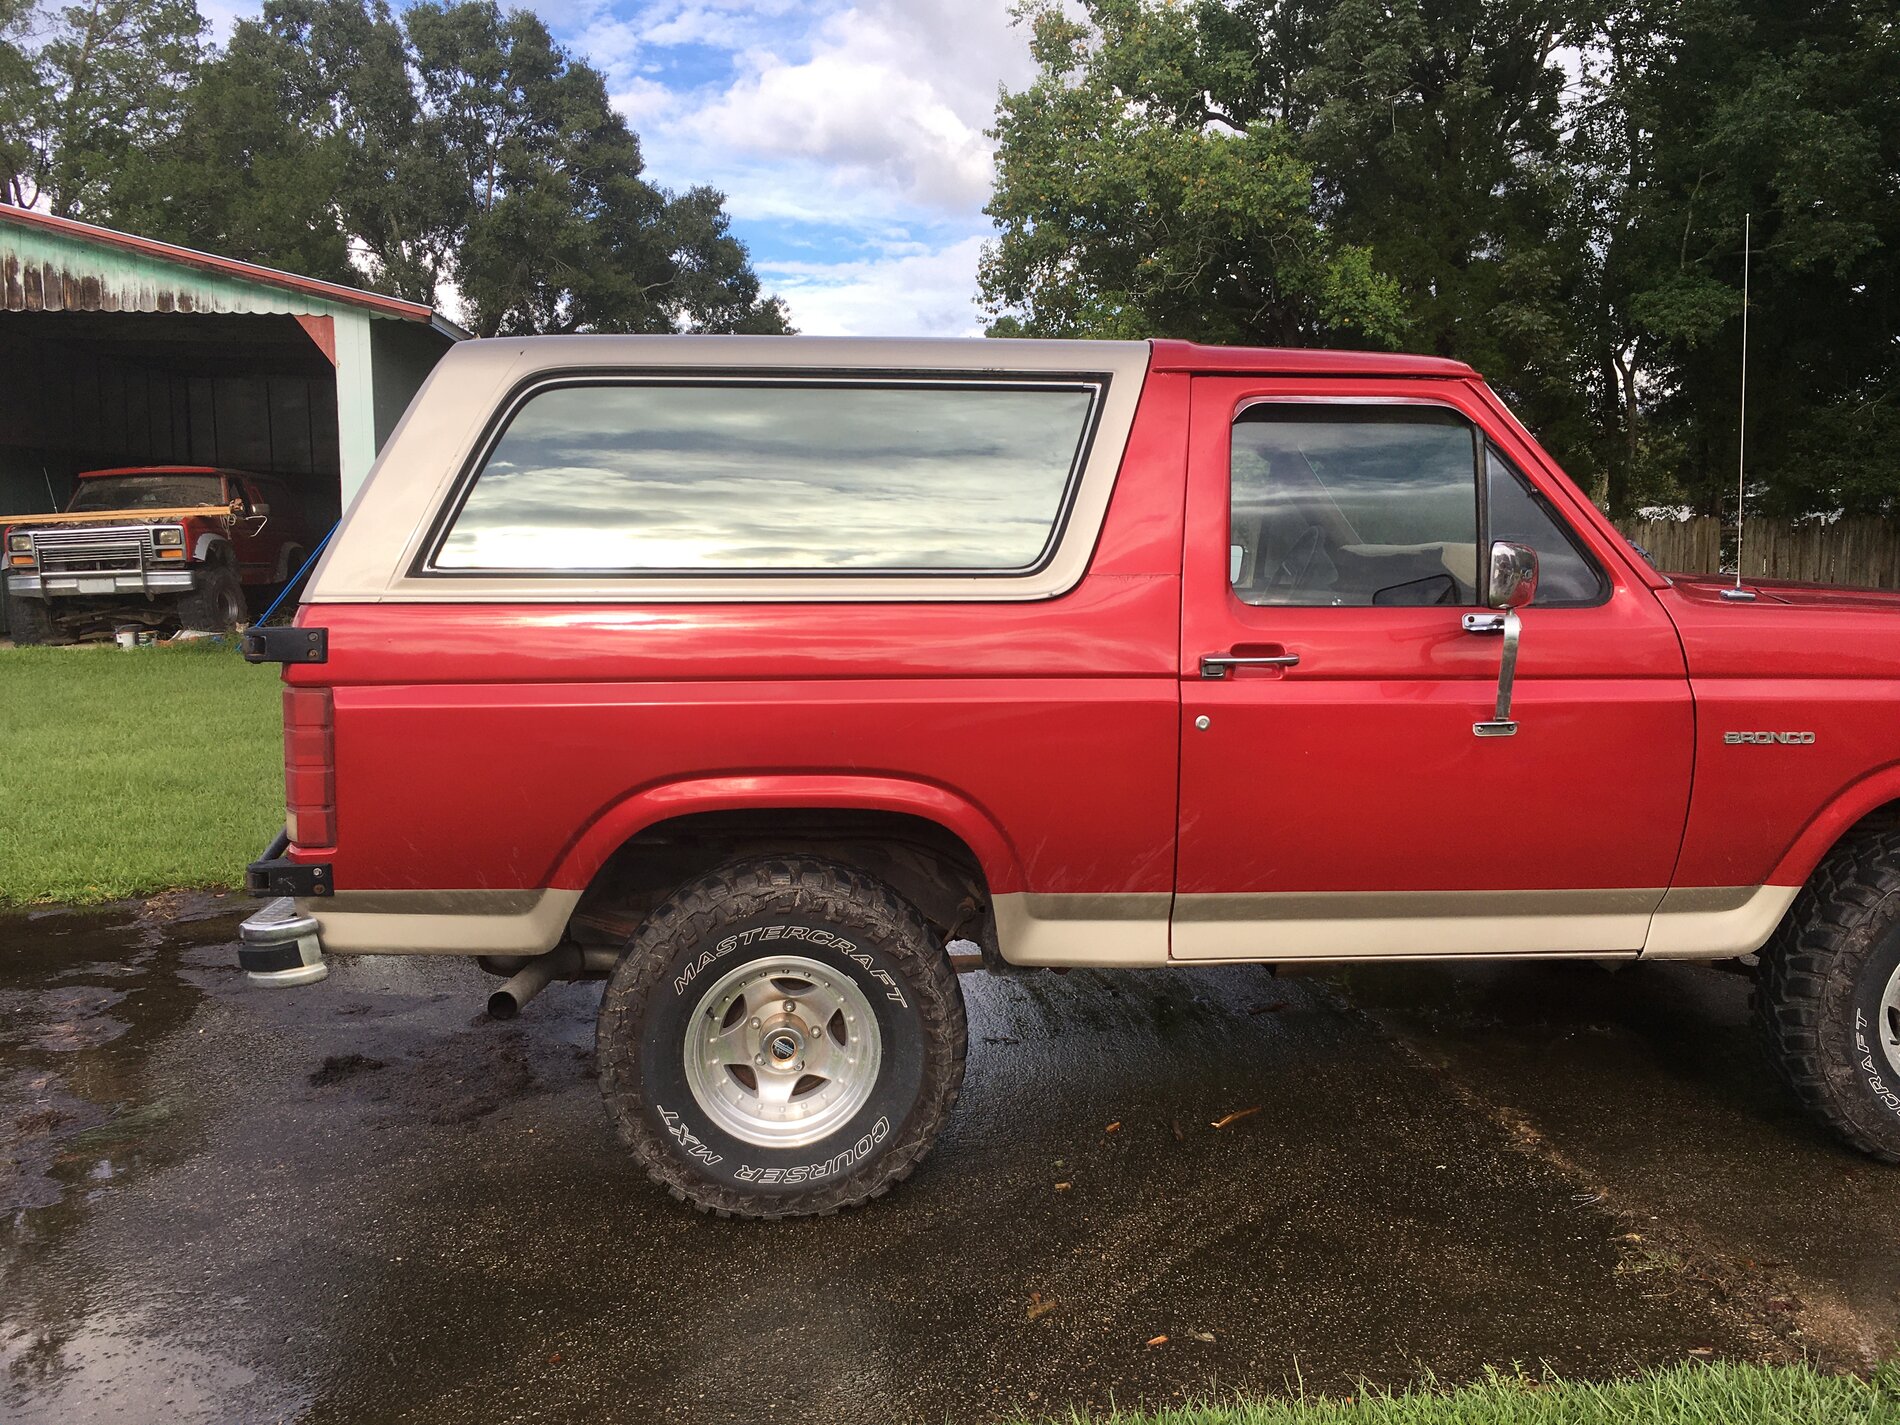 Ford Bronco buying an 83 Bronco tomorrow C64838EA-544D-4772-871F-AA435AB40A7C